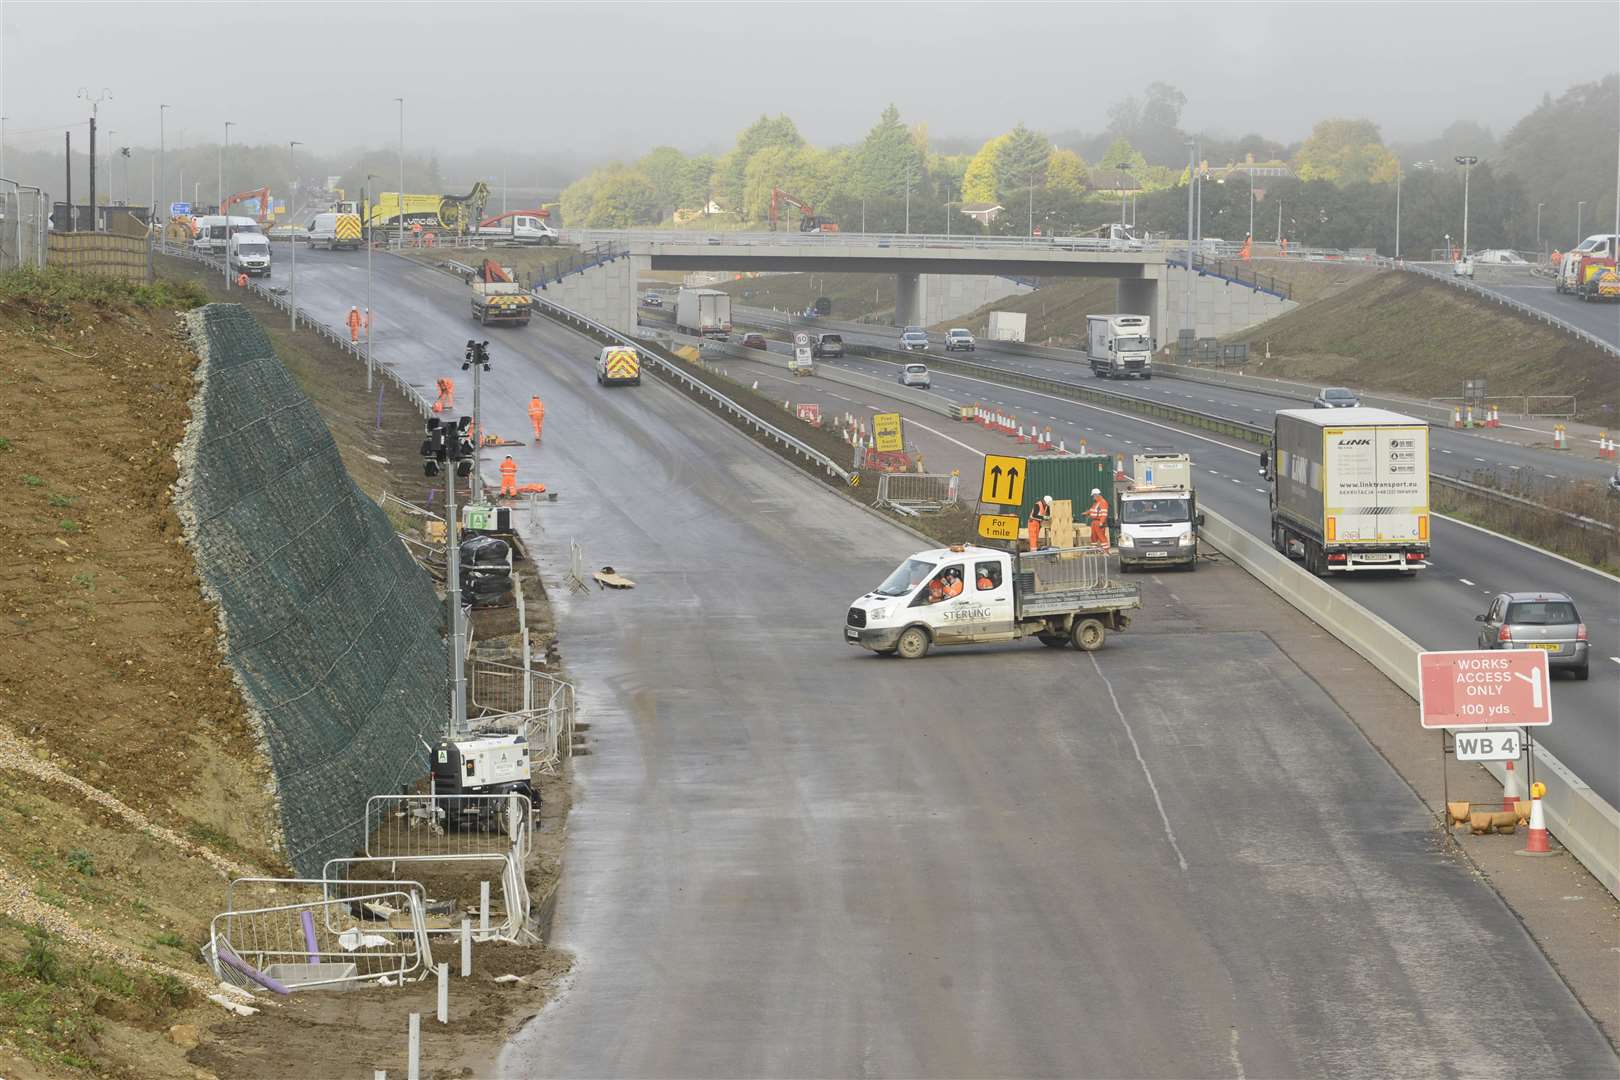 The A20 will be closing for work to be completed on the M20 Junction 10A scheme